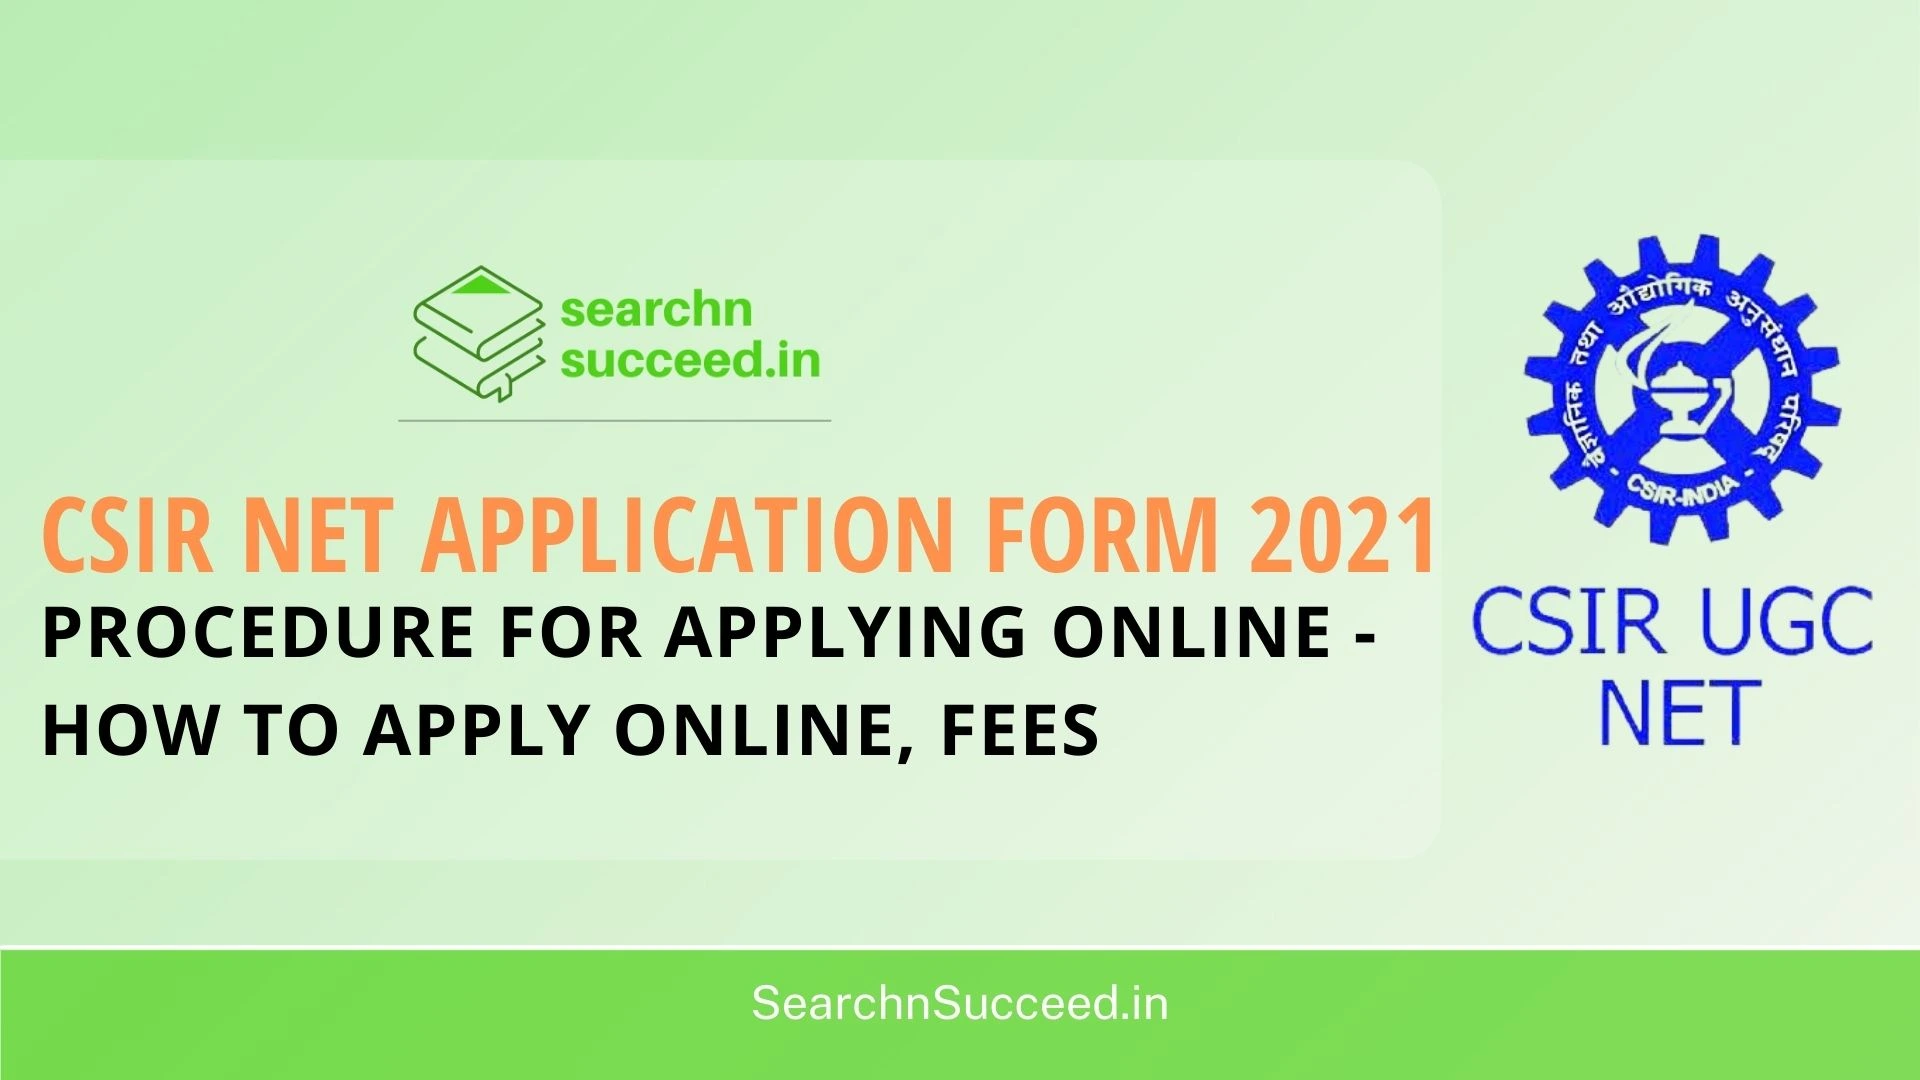 CSIR NET Application Form 2021 - Procedure for applying online - How to Apply Online, Fees